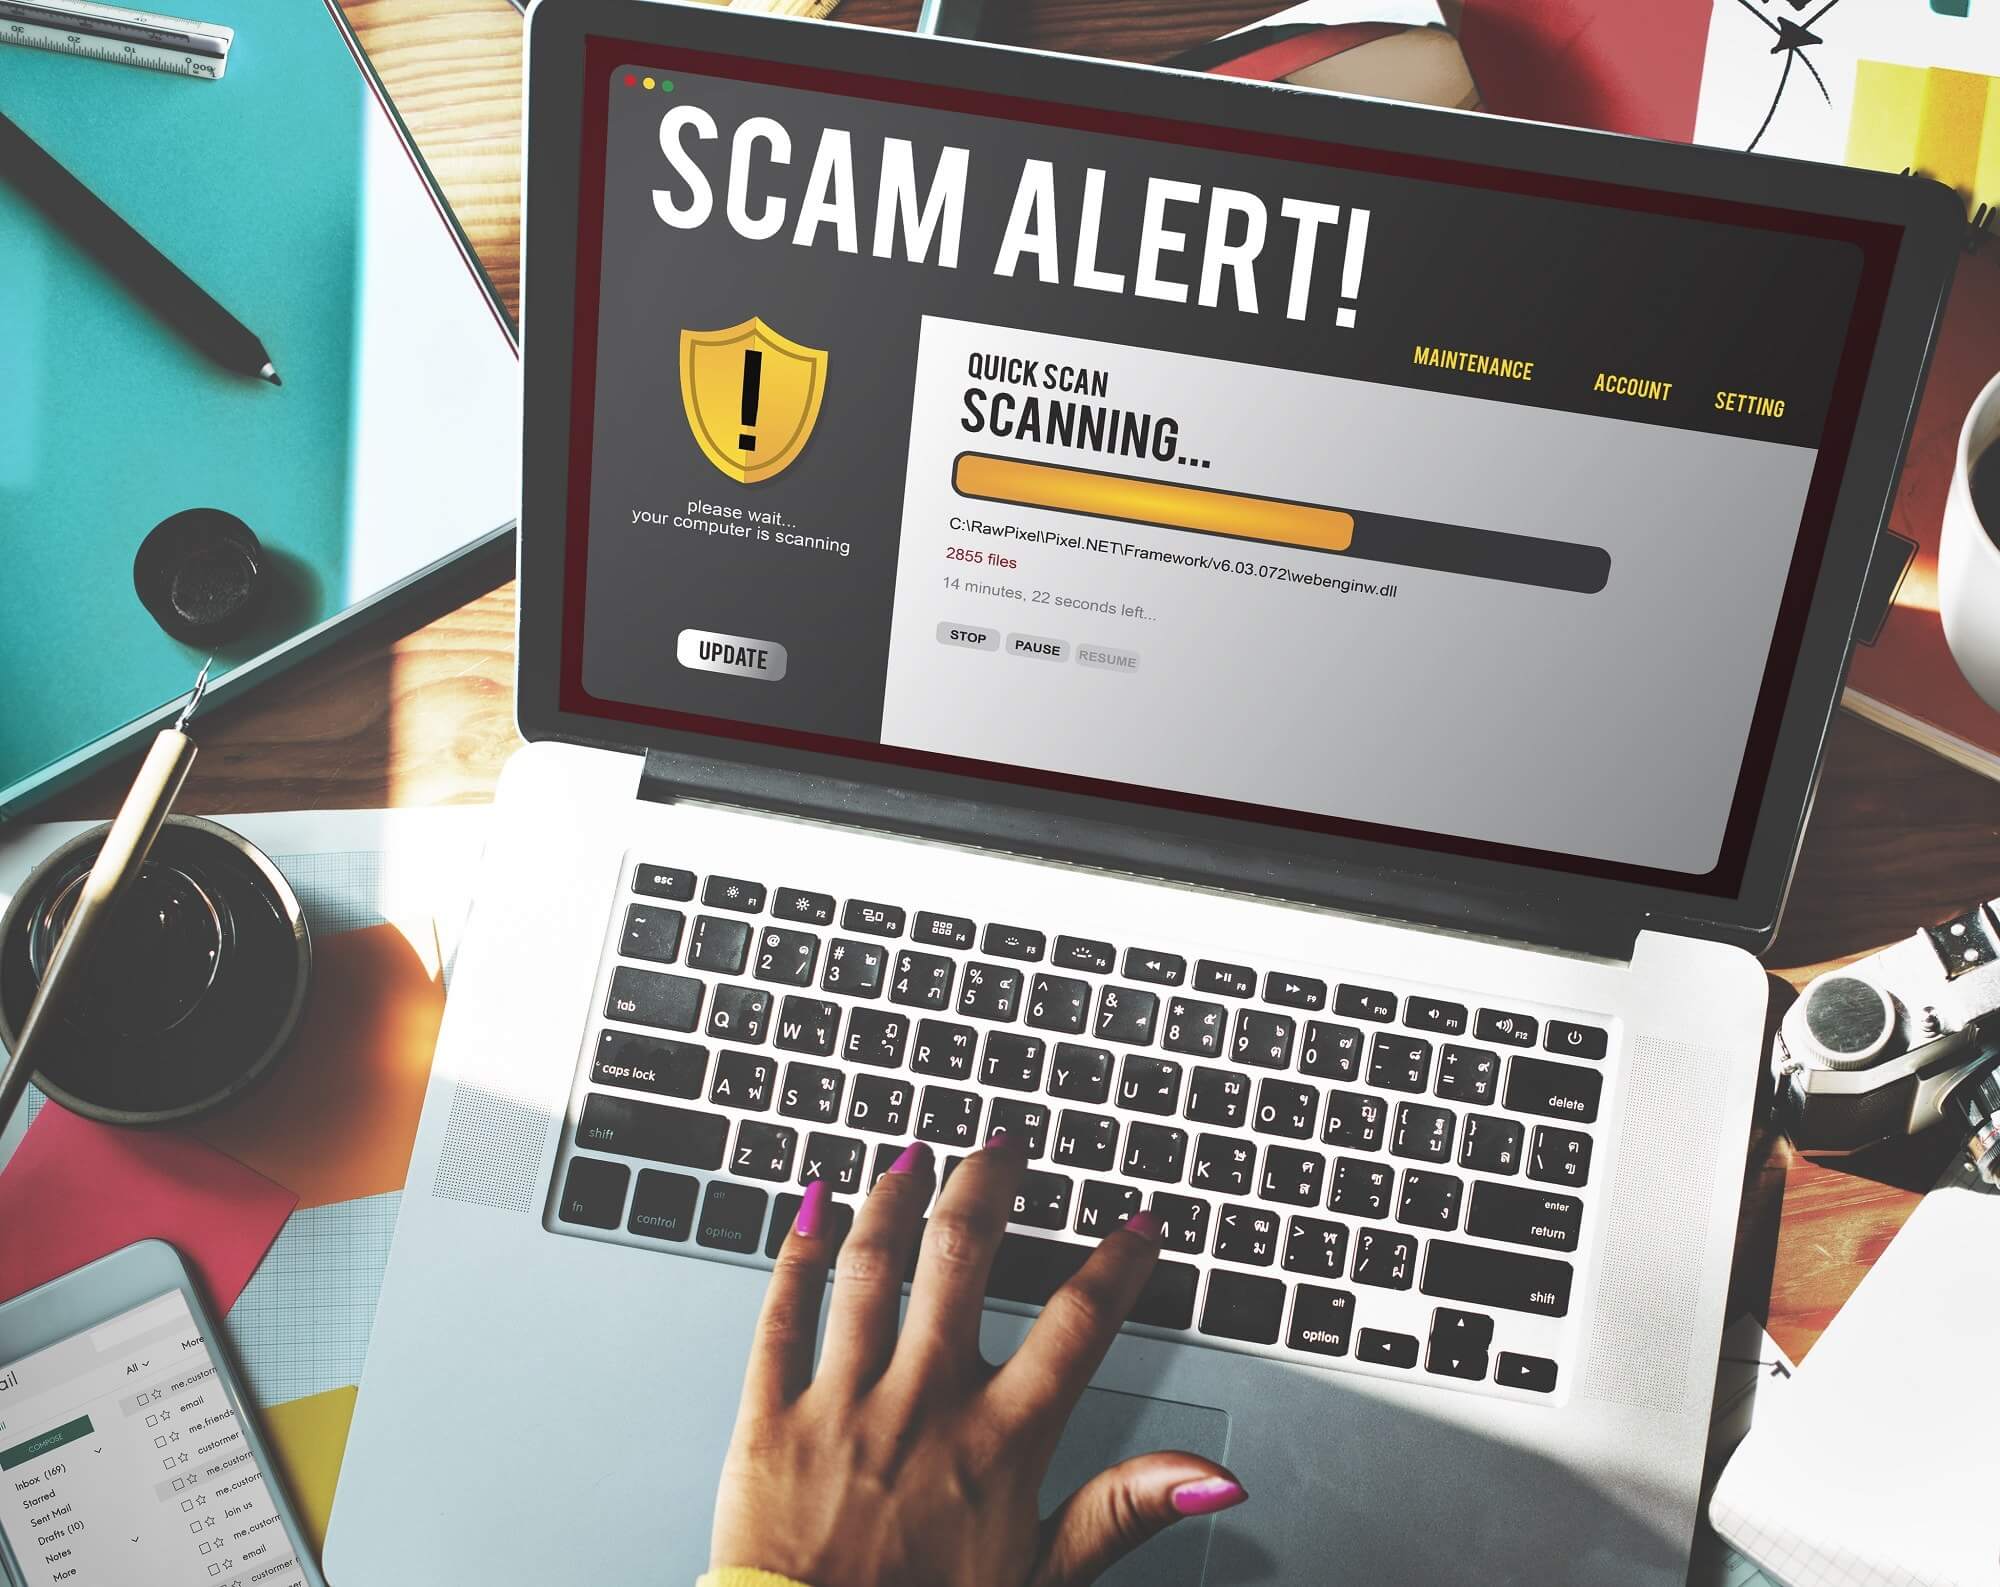 Internet scam data shows which states had most victims and lost most money